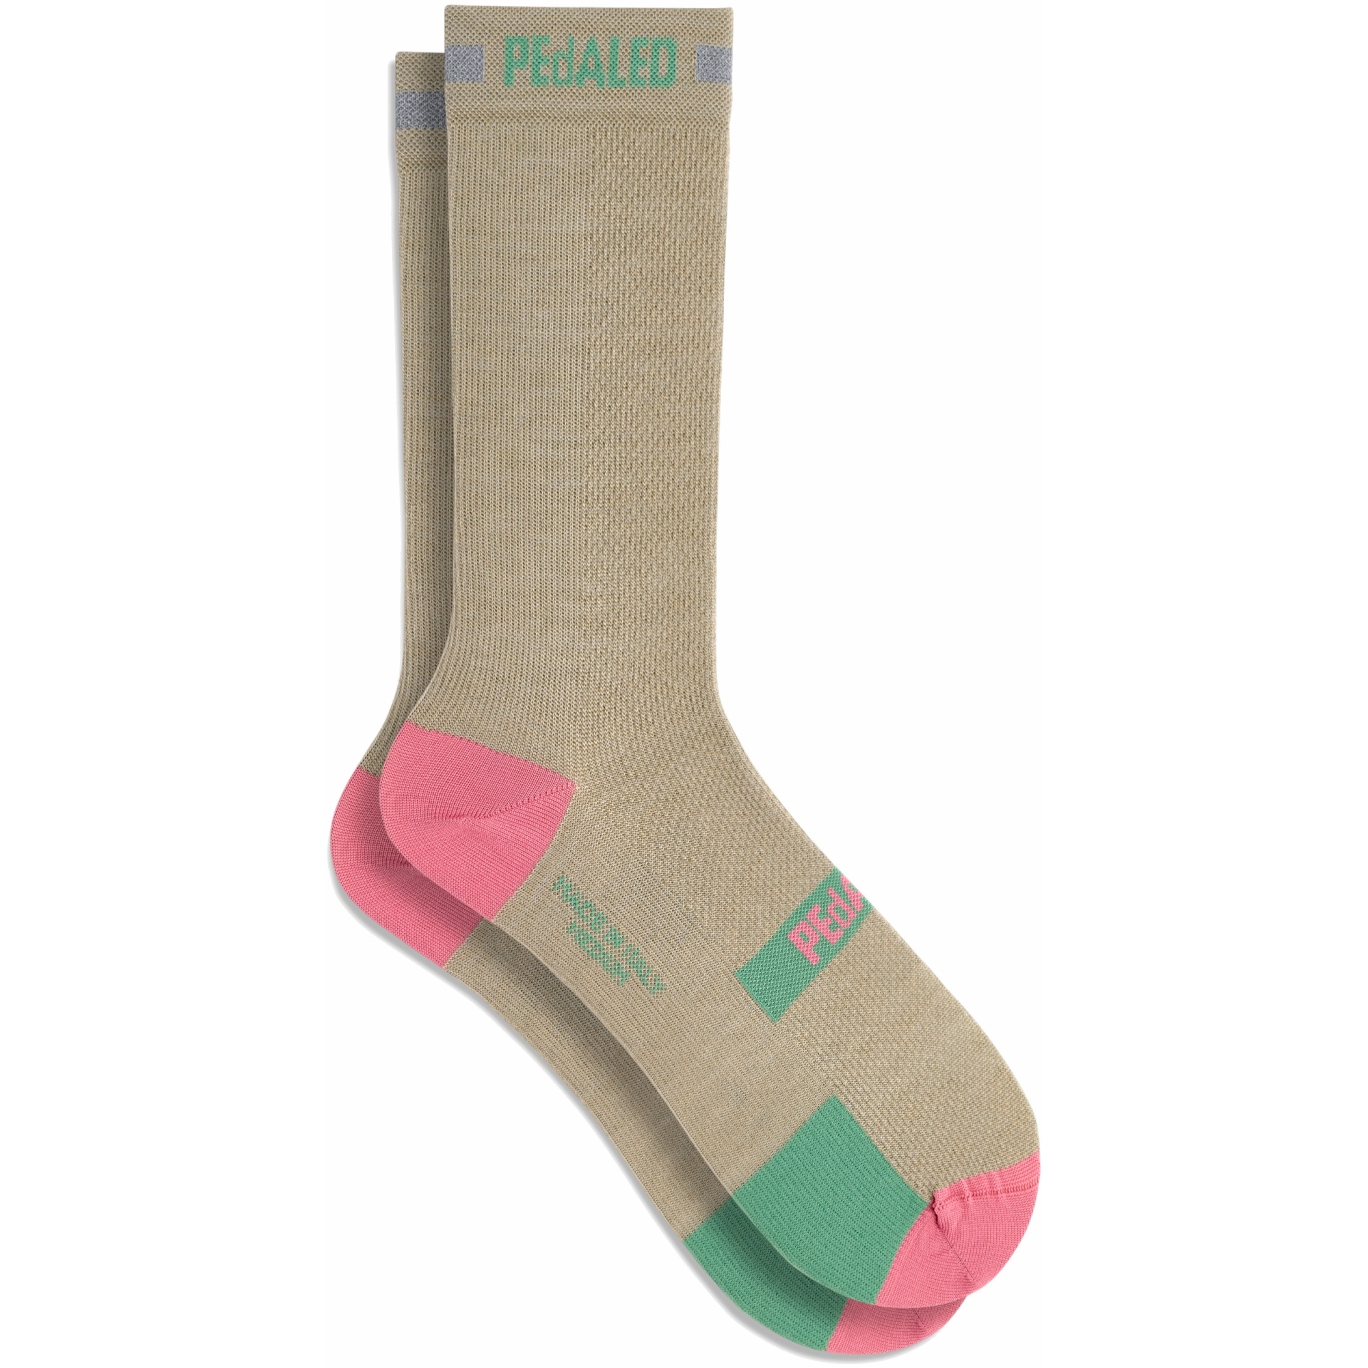 Picture of PEdALED Odyssey Merino Reflective Socks - Beige